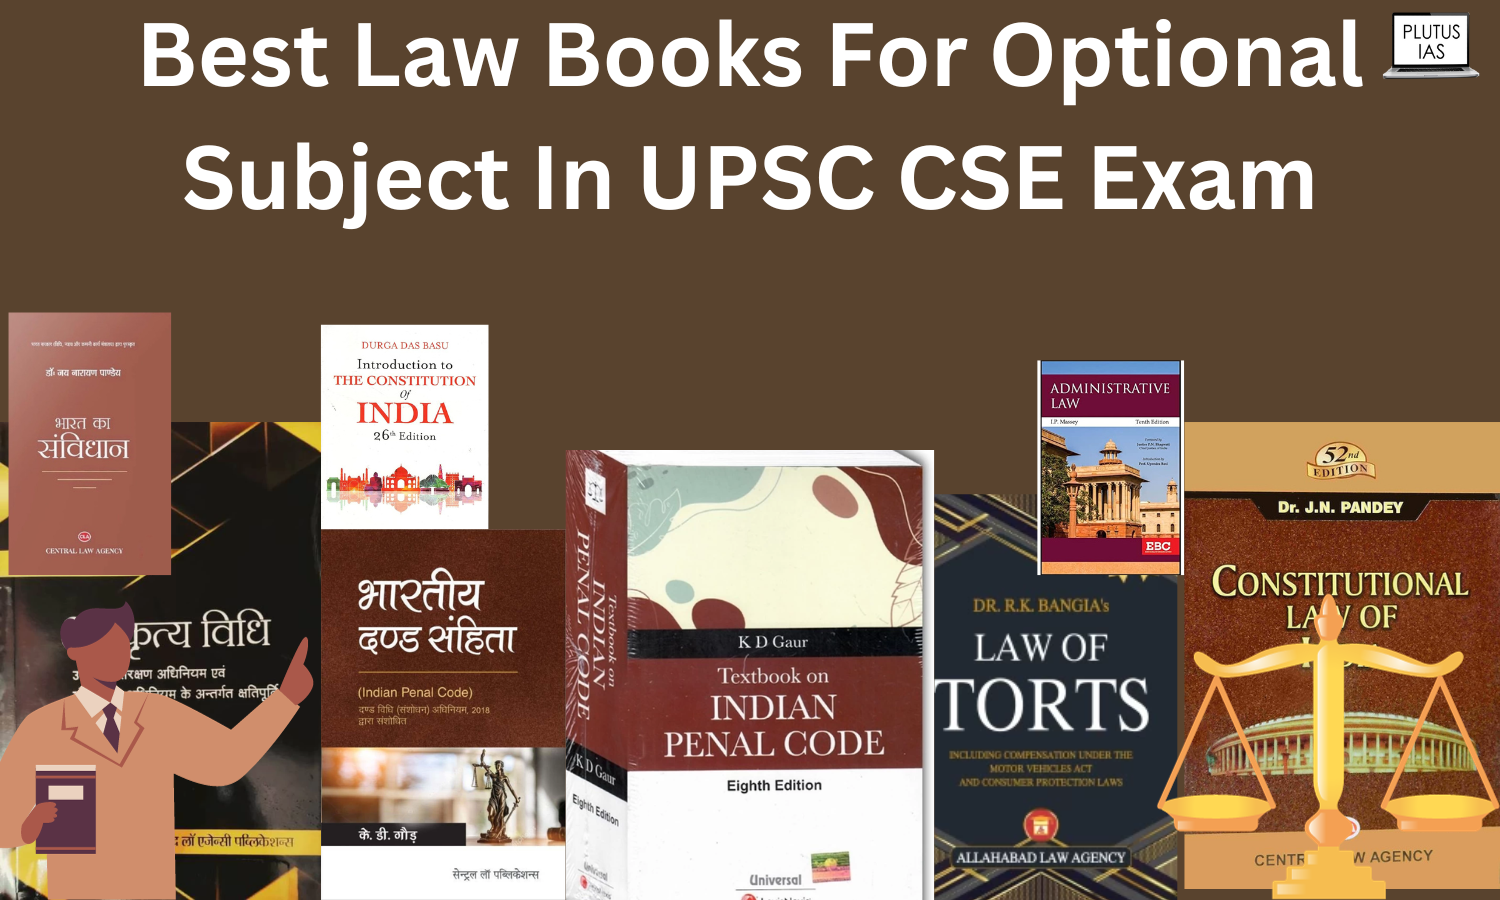 Best Law Books For Optional Subject In UPSC CSE Exam